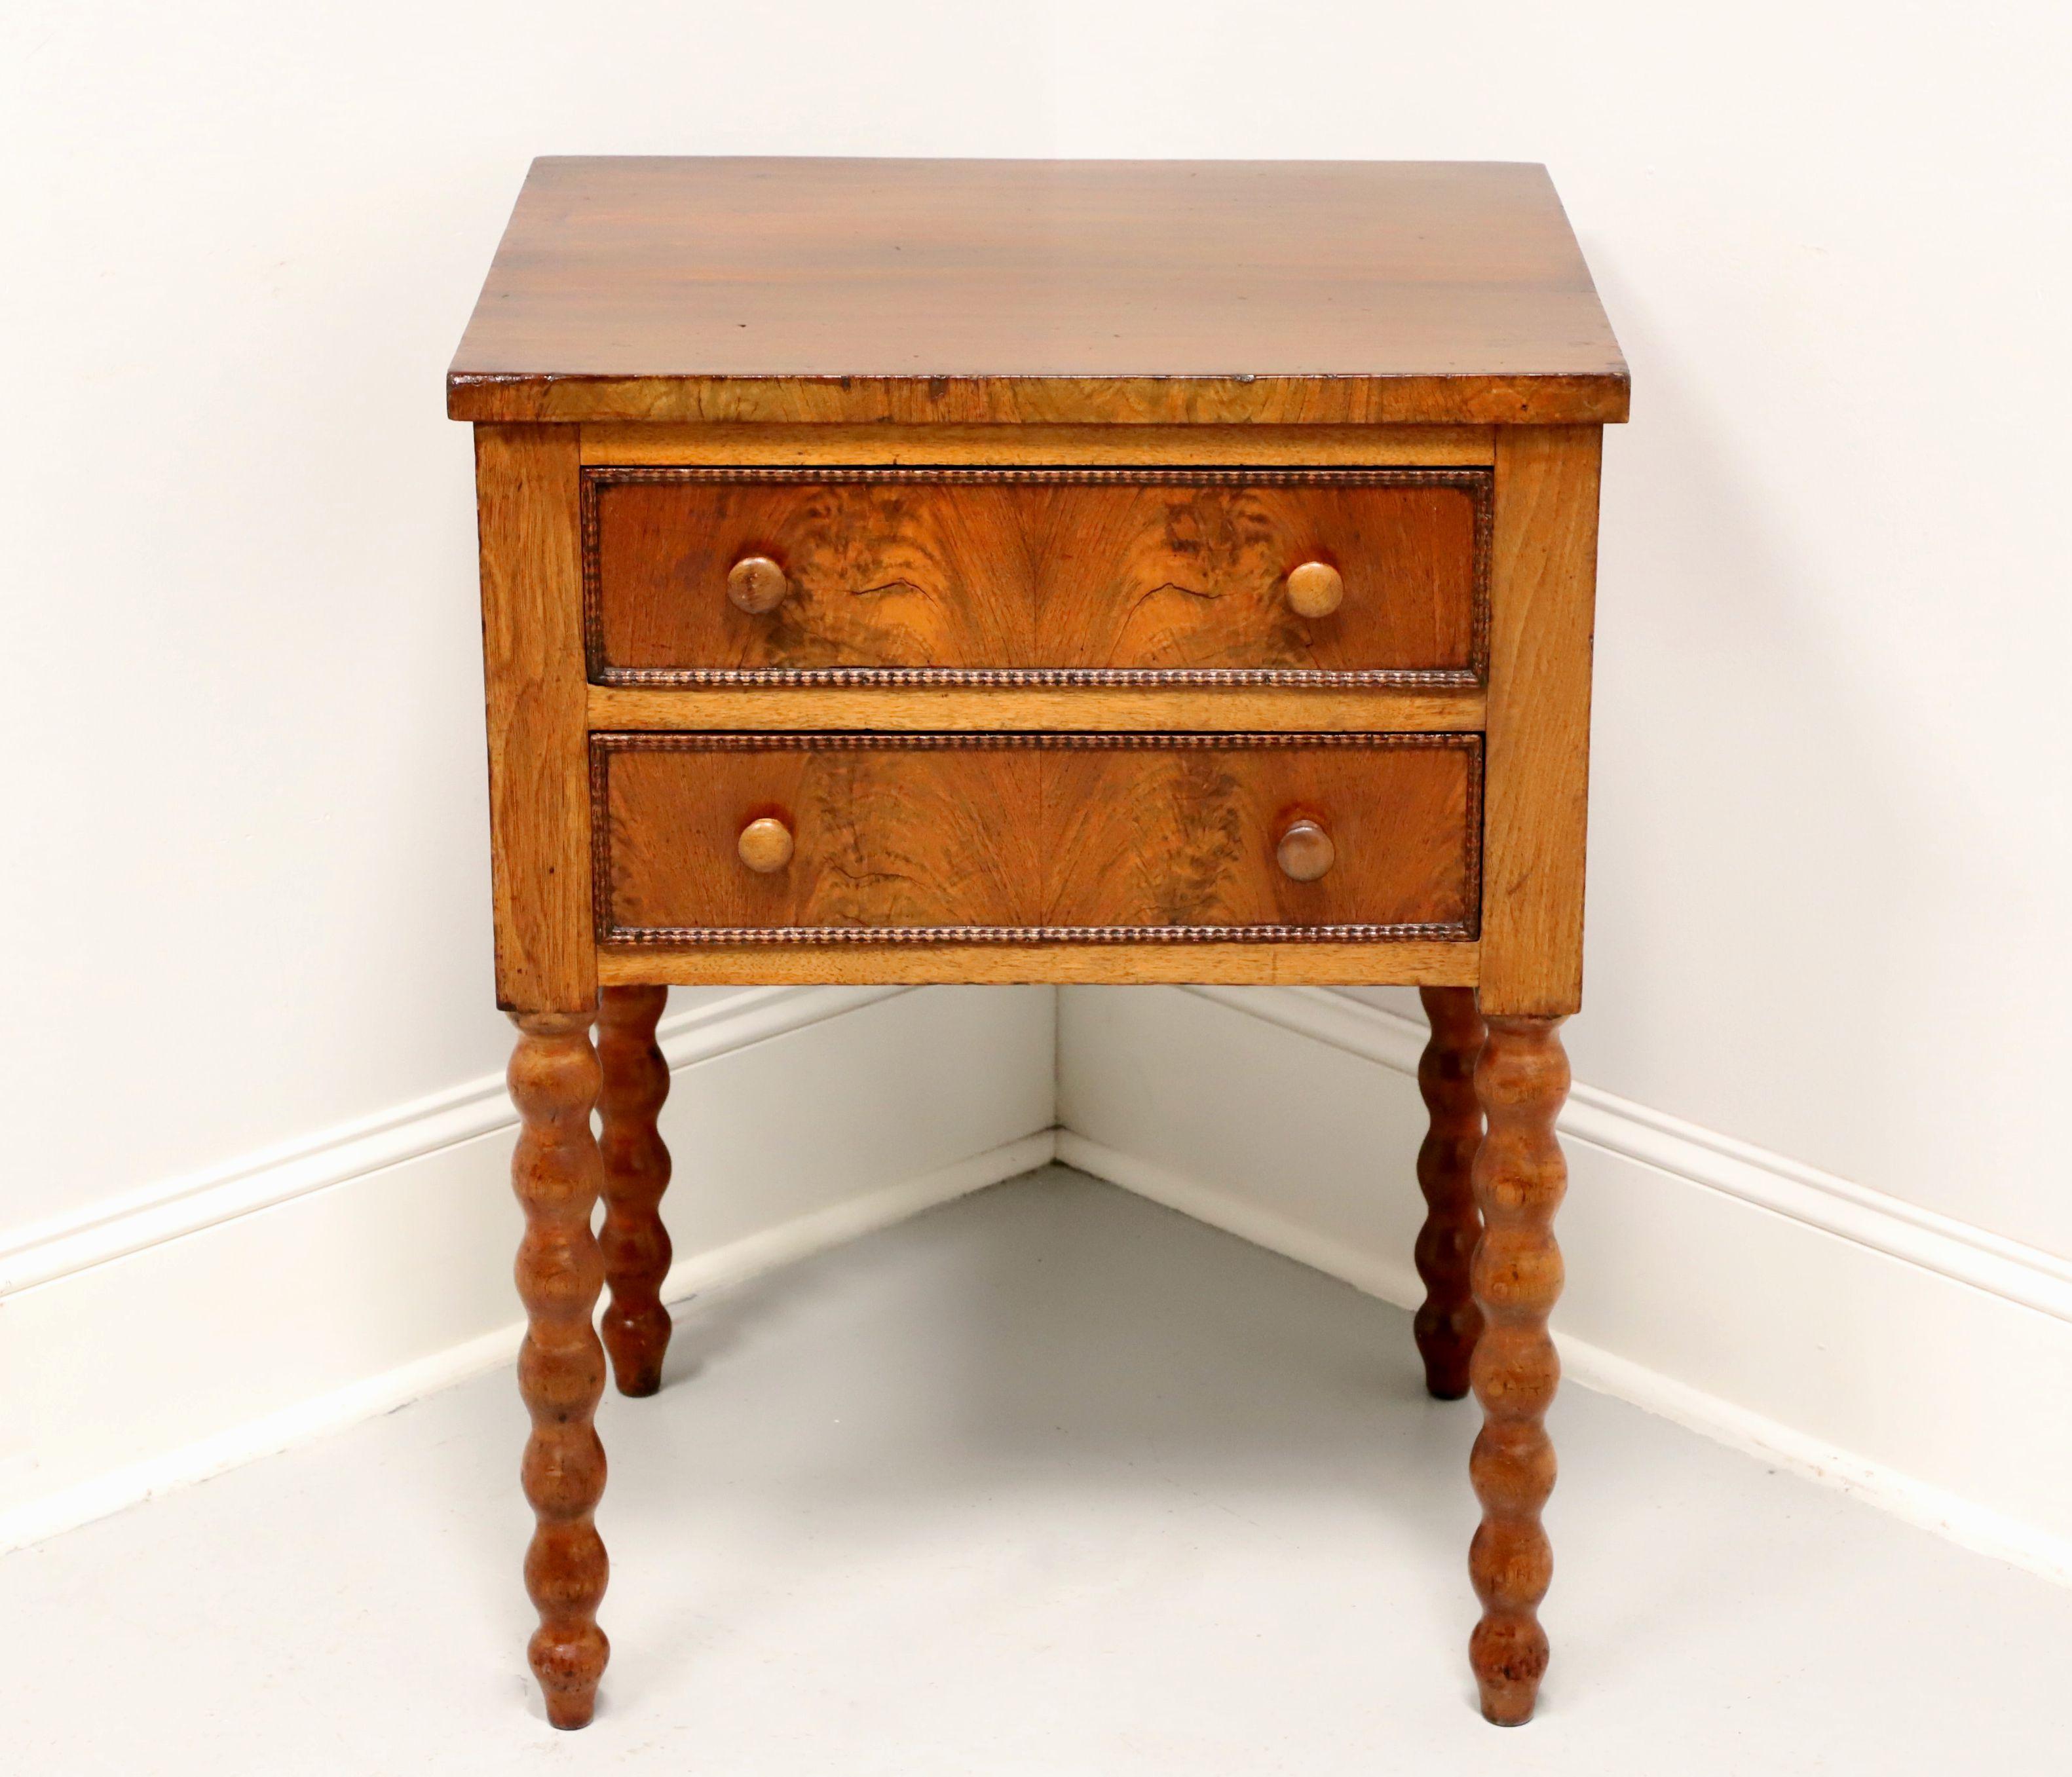 An antique side table from the Victorian era, unbranded. Handcrafted of walnut with burl to drawer fronts, polished wood knobs and bobbin like legs. Features two drawers of dovetail construction. Likely made in England, in the 19th